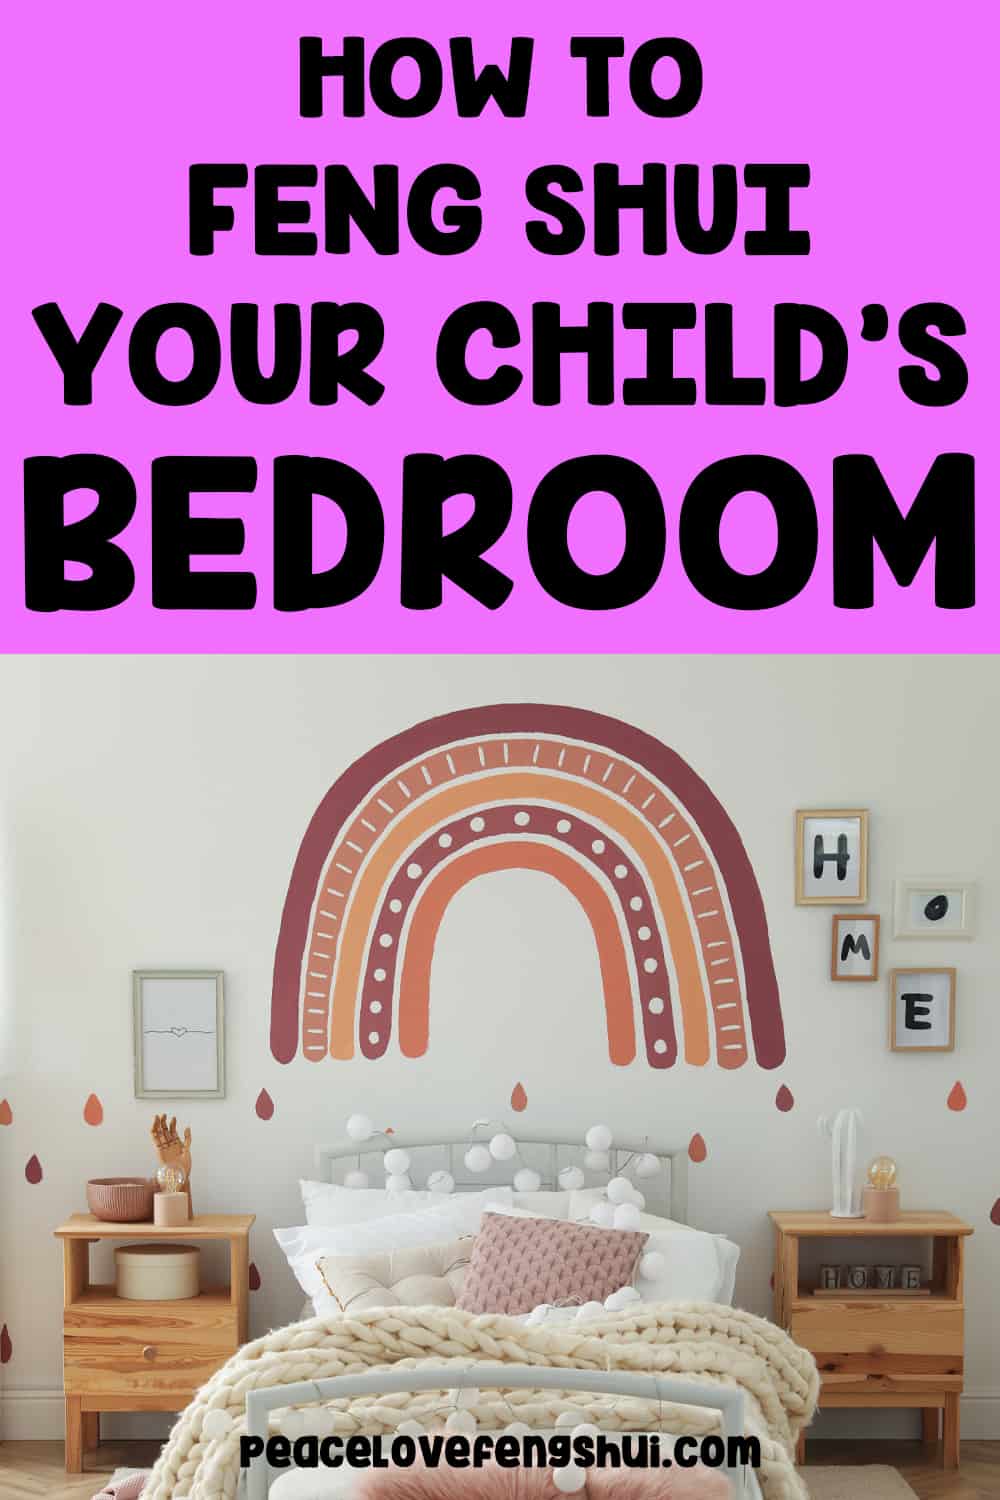 how to feng shui your child's bedroom